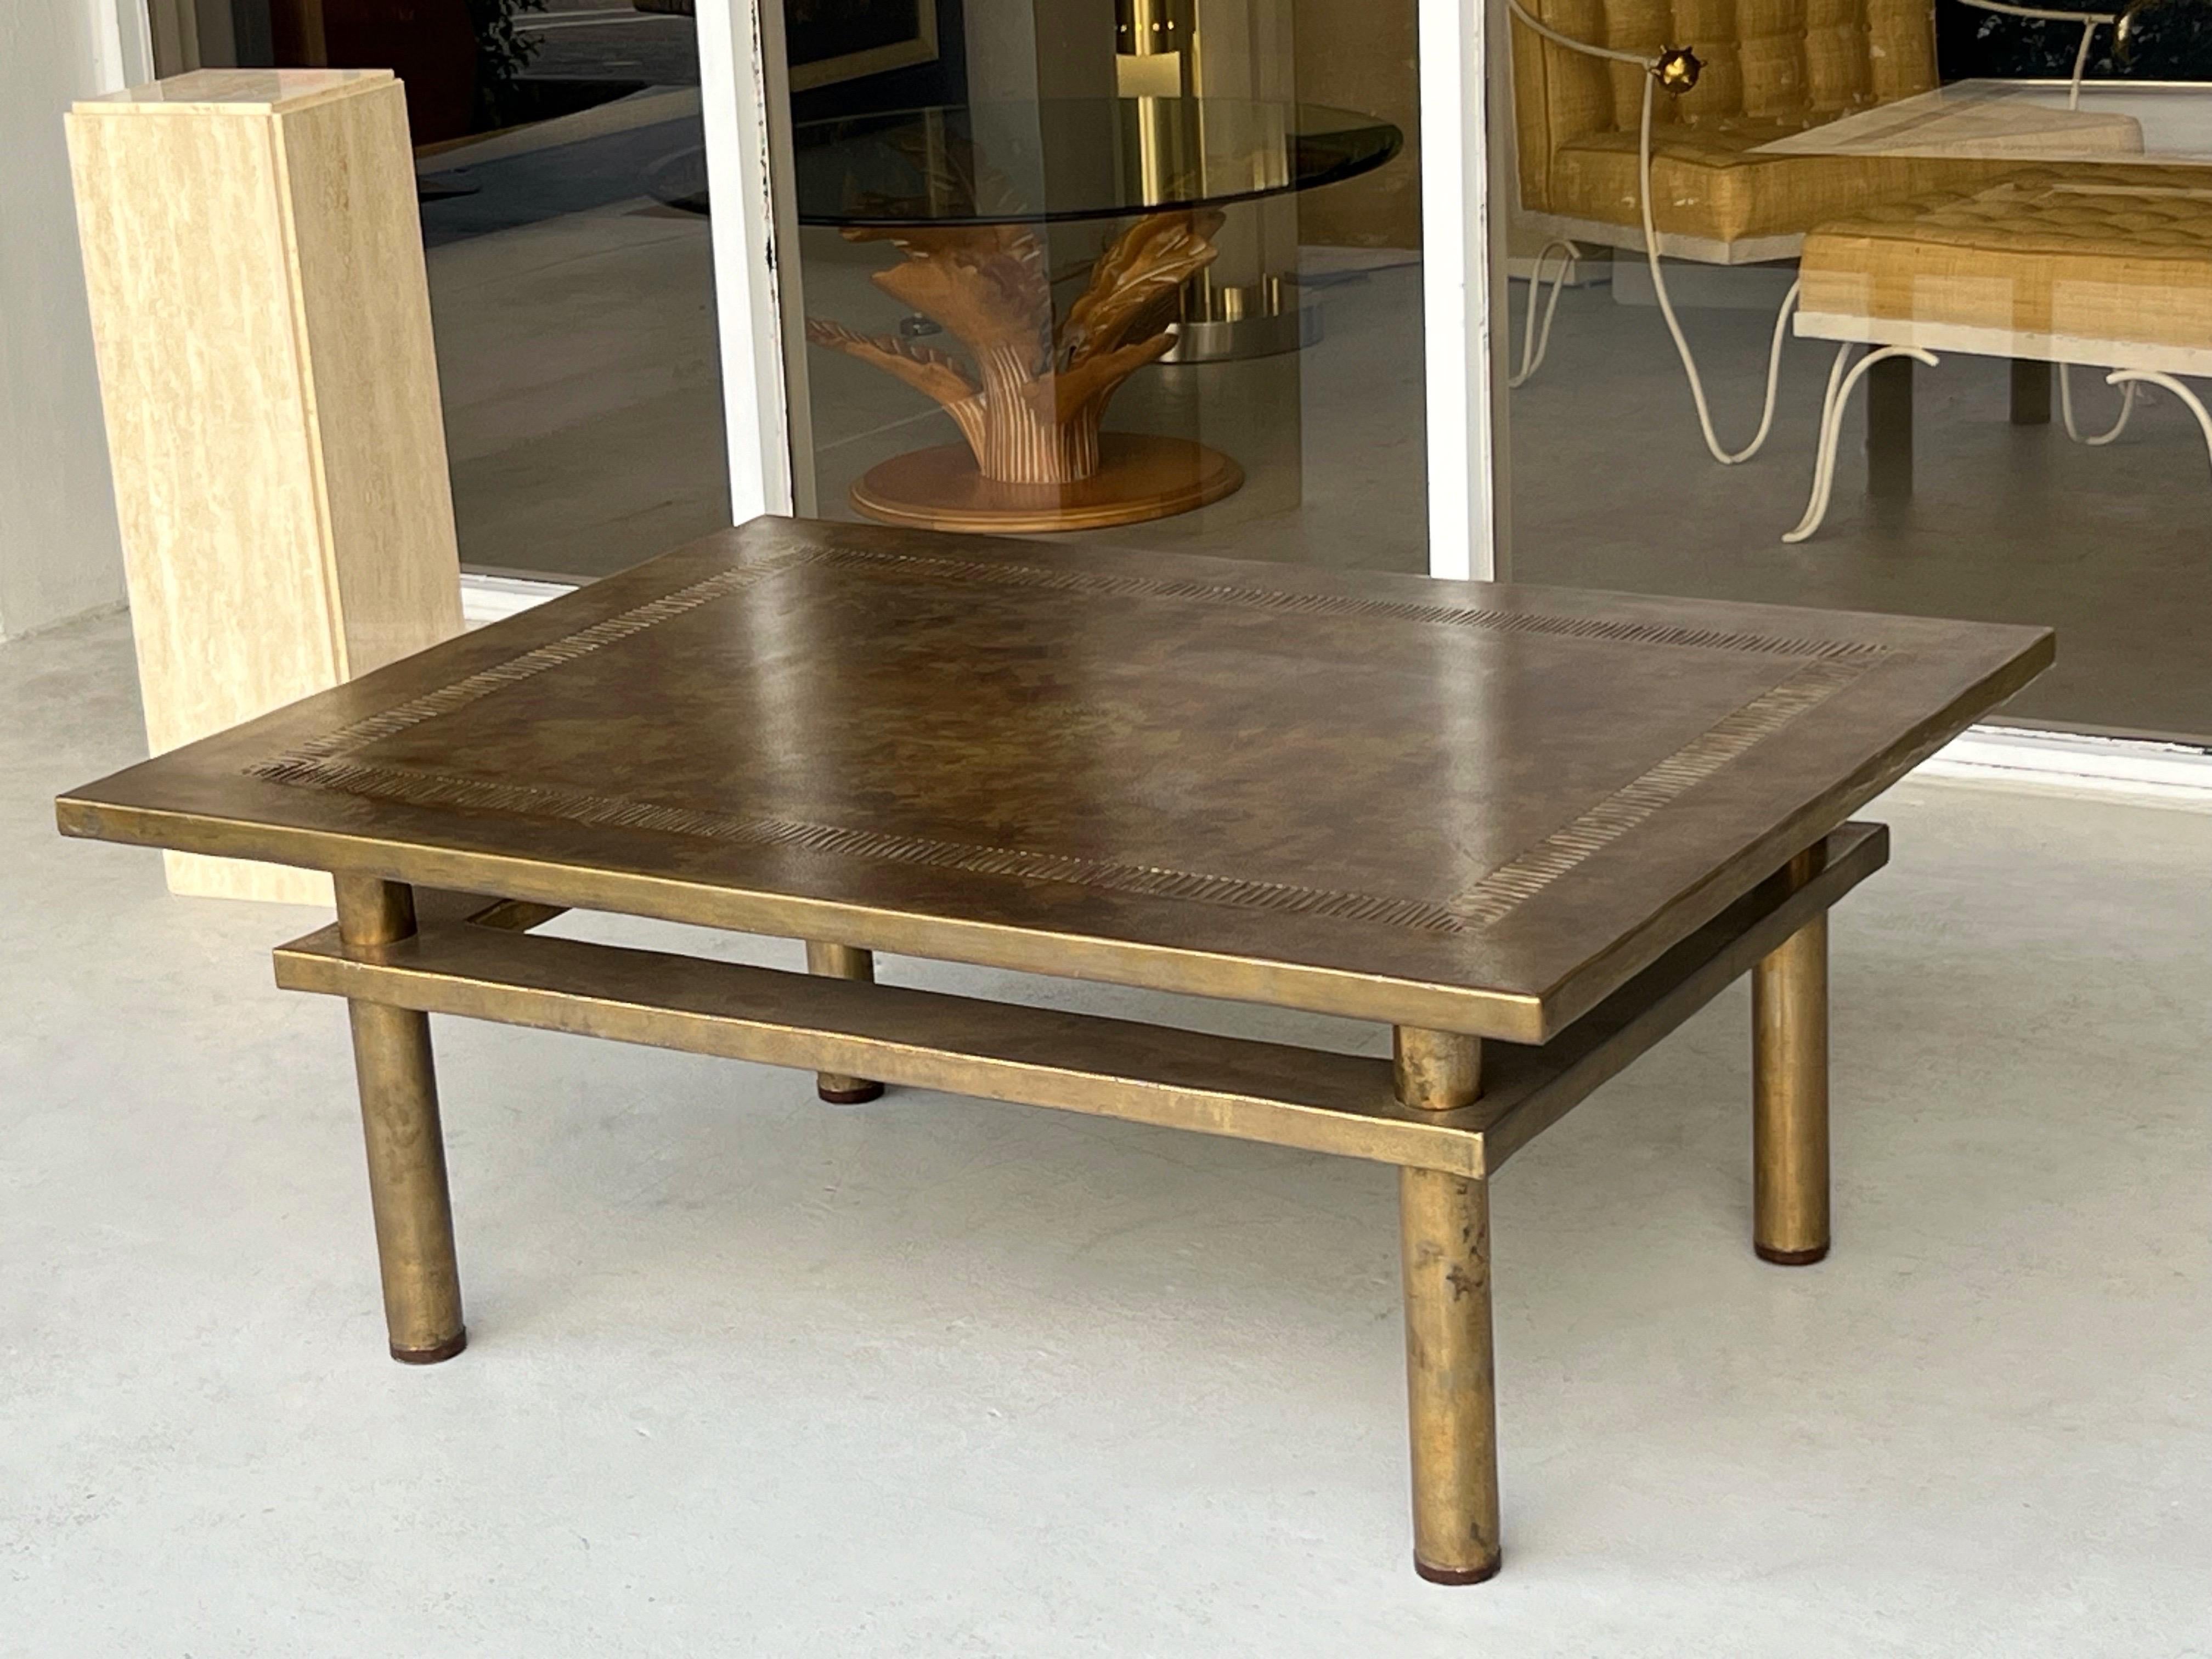 A well proportioned coffee table. The legs are bronze with a patinated bronze clad top. The top has subtle uneven edges, and an intaglio design on the perimeter. Beautiful patina.